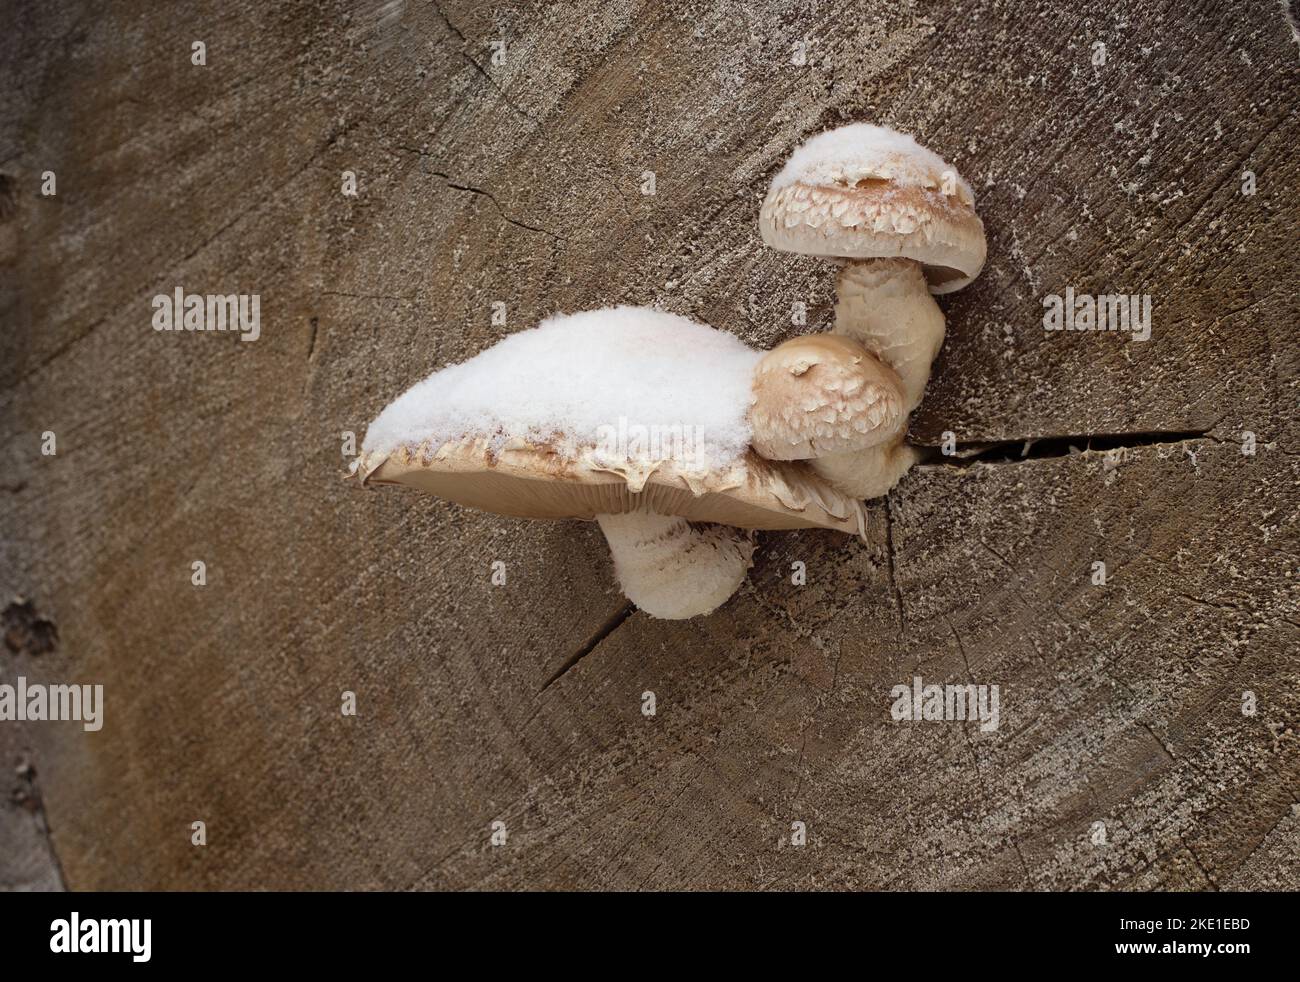 Snow covered Detructive Pholiota mushrooms, Hemipholiota populnea (Pholiota destruens) mushroom growing on the end of  a cottonwood log, in Troy, Mont Stock Photo